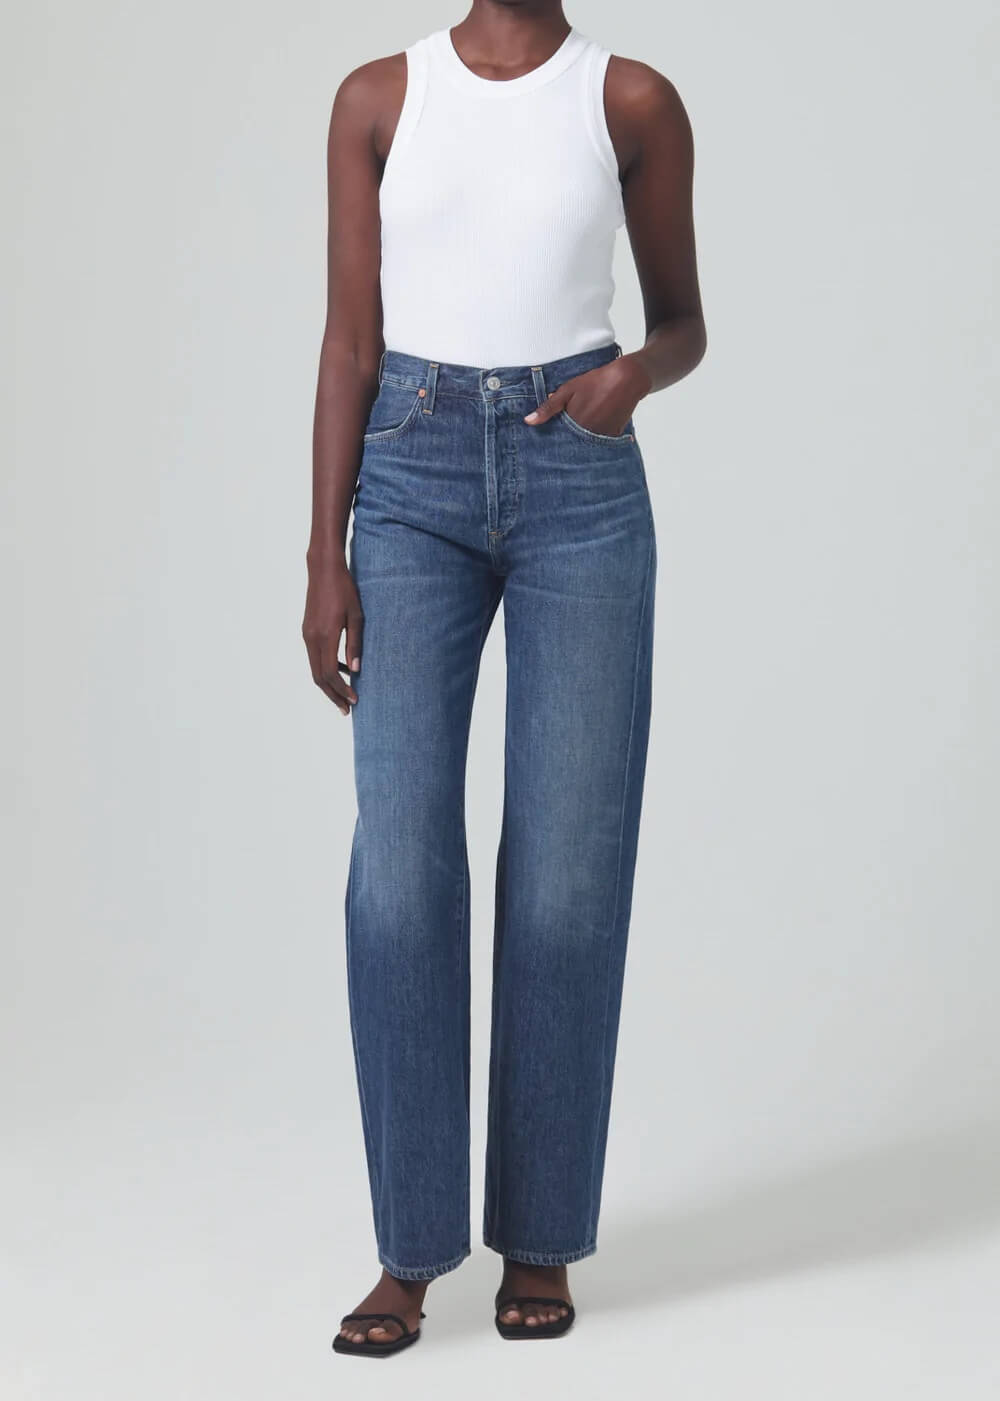 Citizens Of Humanity Annina Trouser Jean in Blue Rose from The New Trend